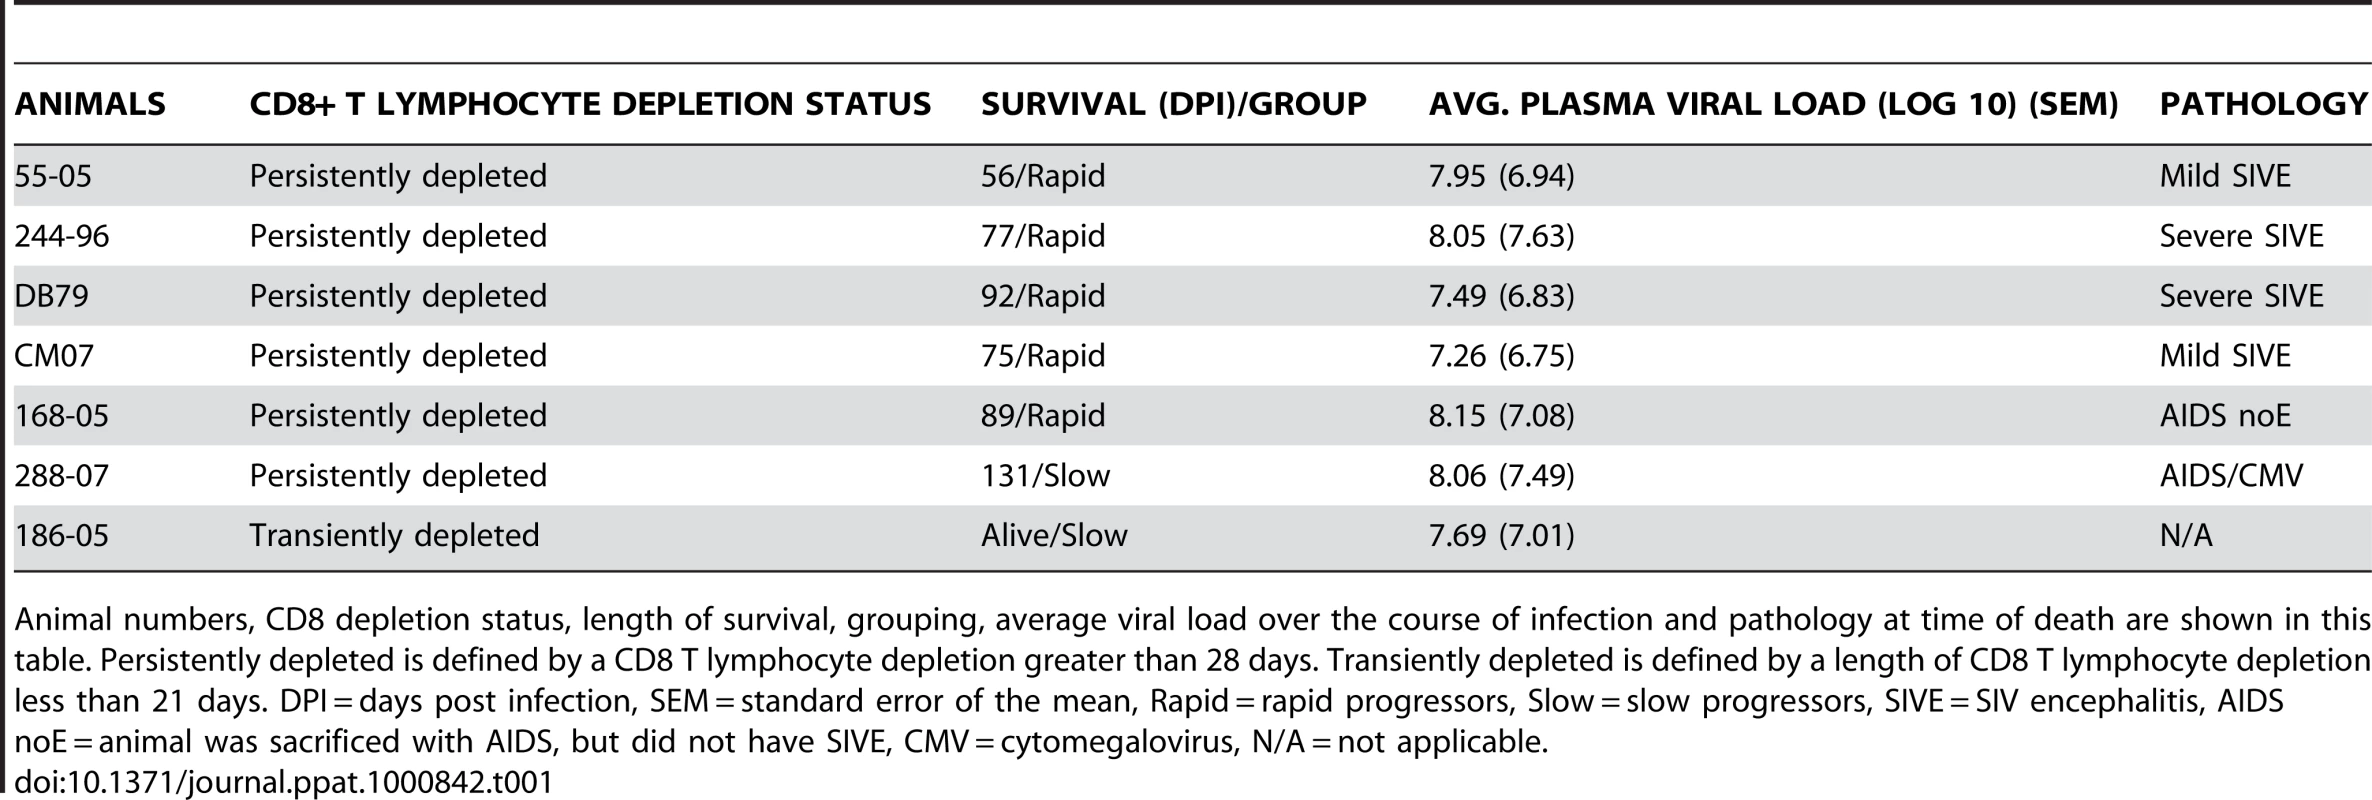 SIV CD8+ T lymphocyte depleted animals used in the study.